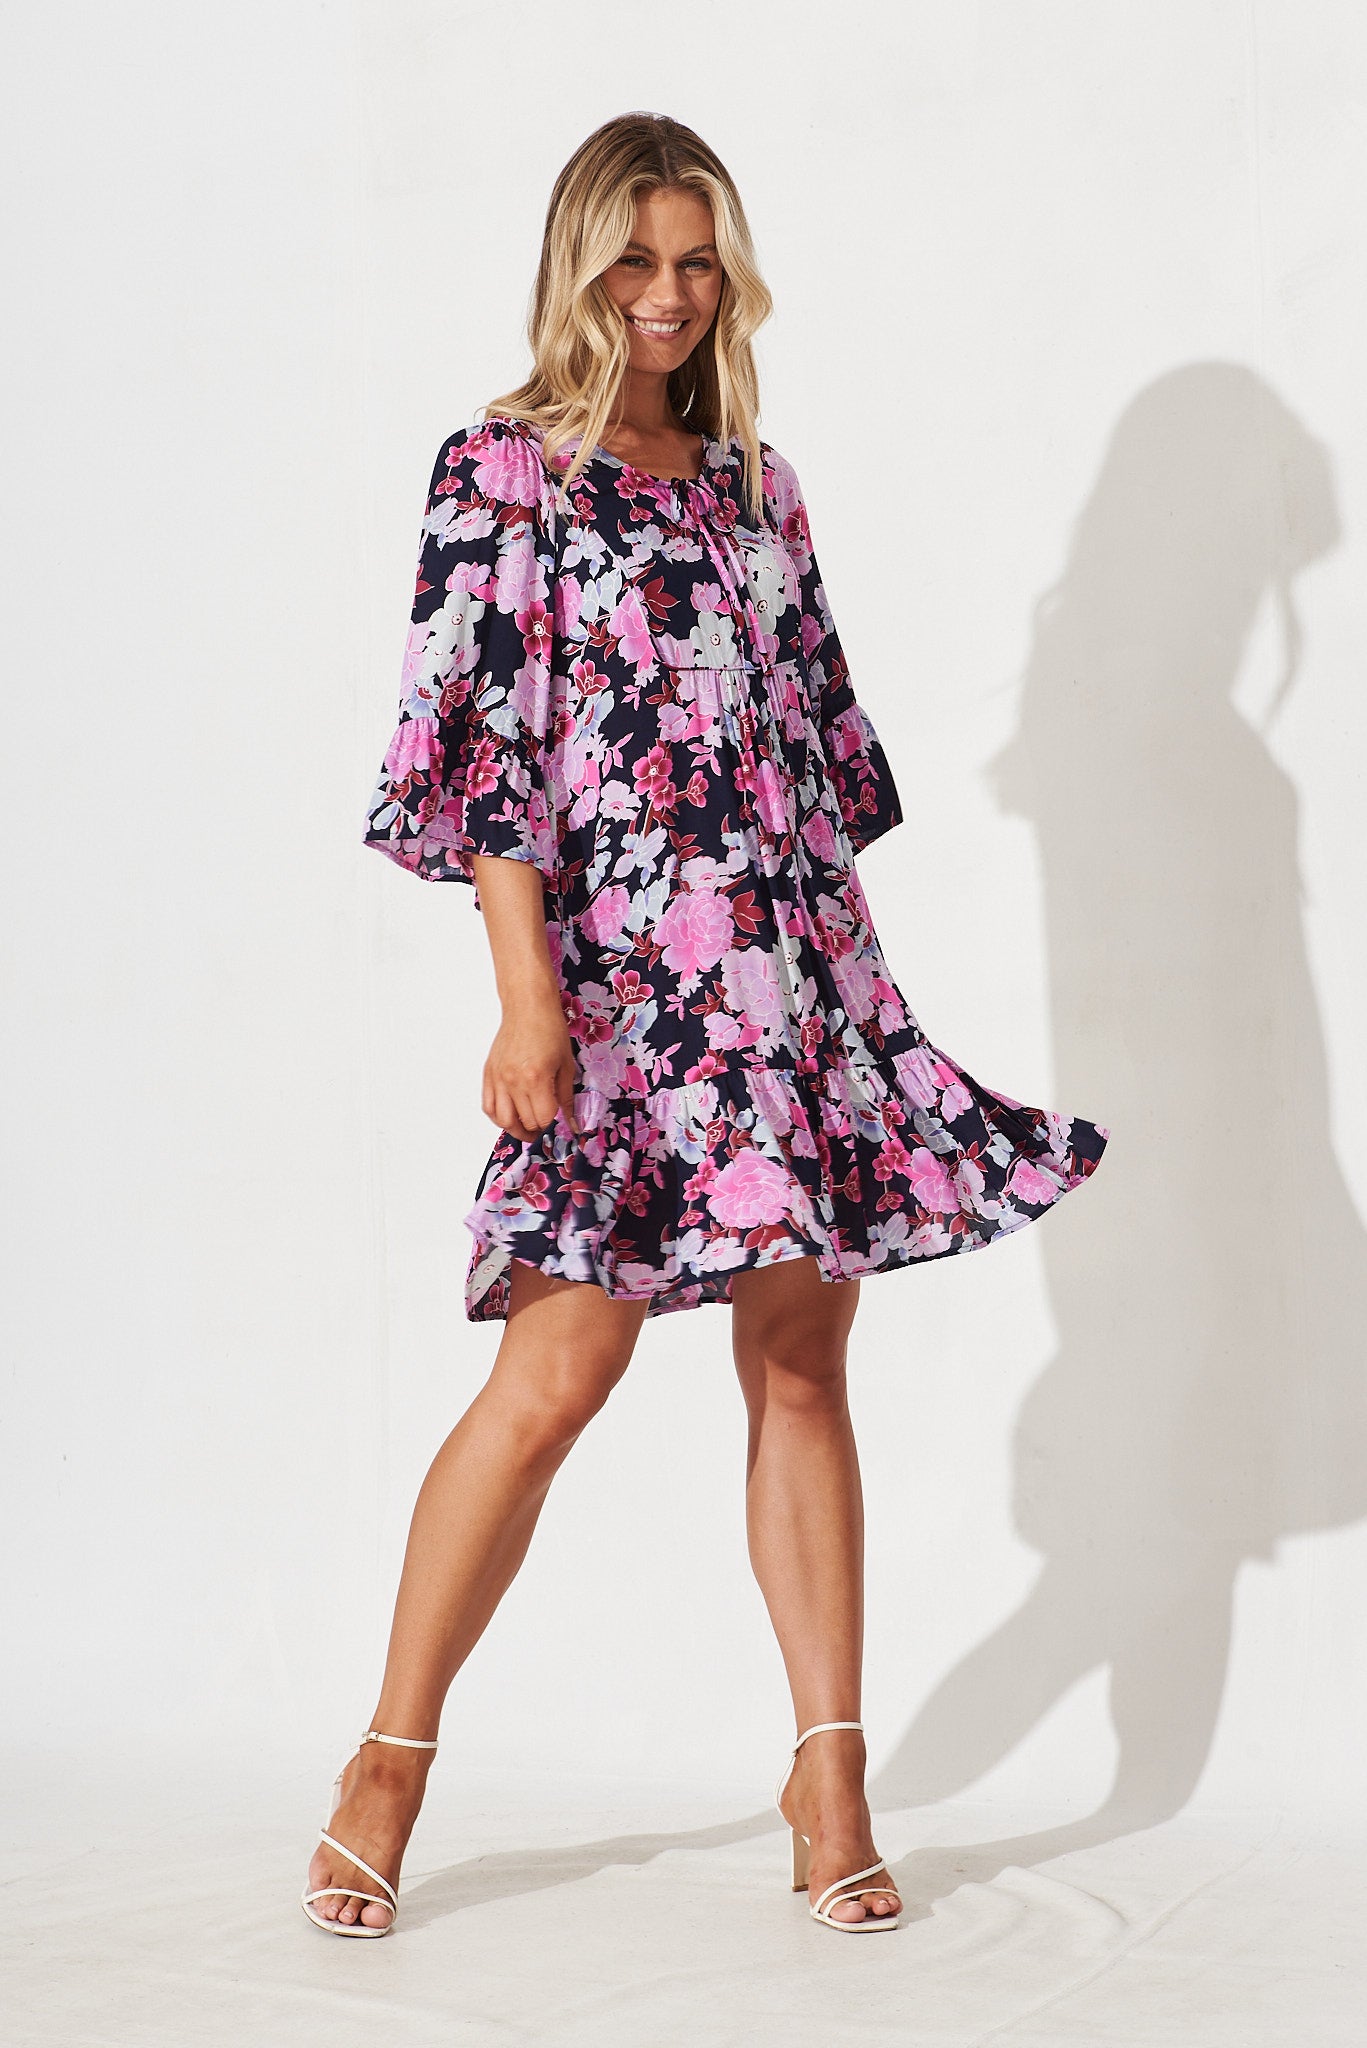 Caressa Dress In Navy With Pink Floral - full length